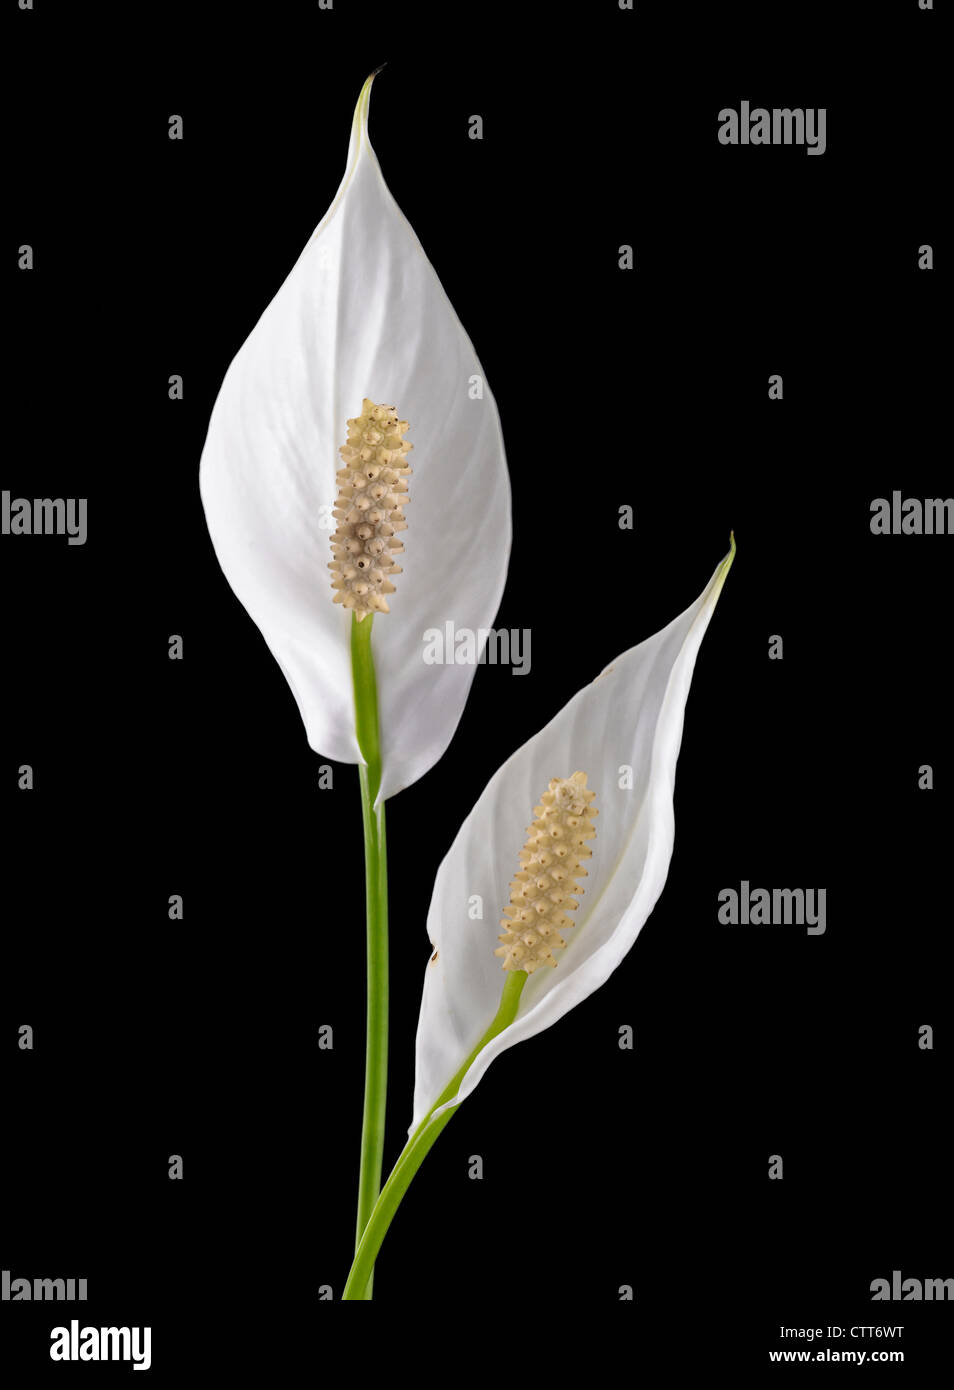 Spathiphyllum wallisii, Peace lily, White bracts on flowers against a black background. Stock Photo